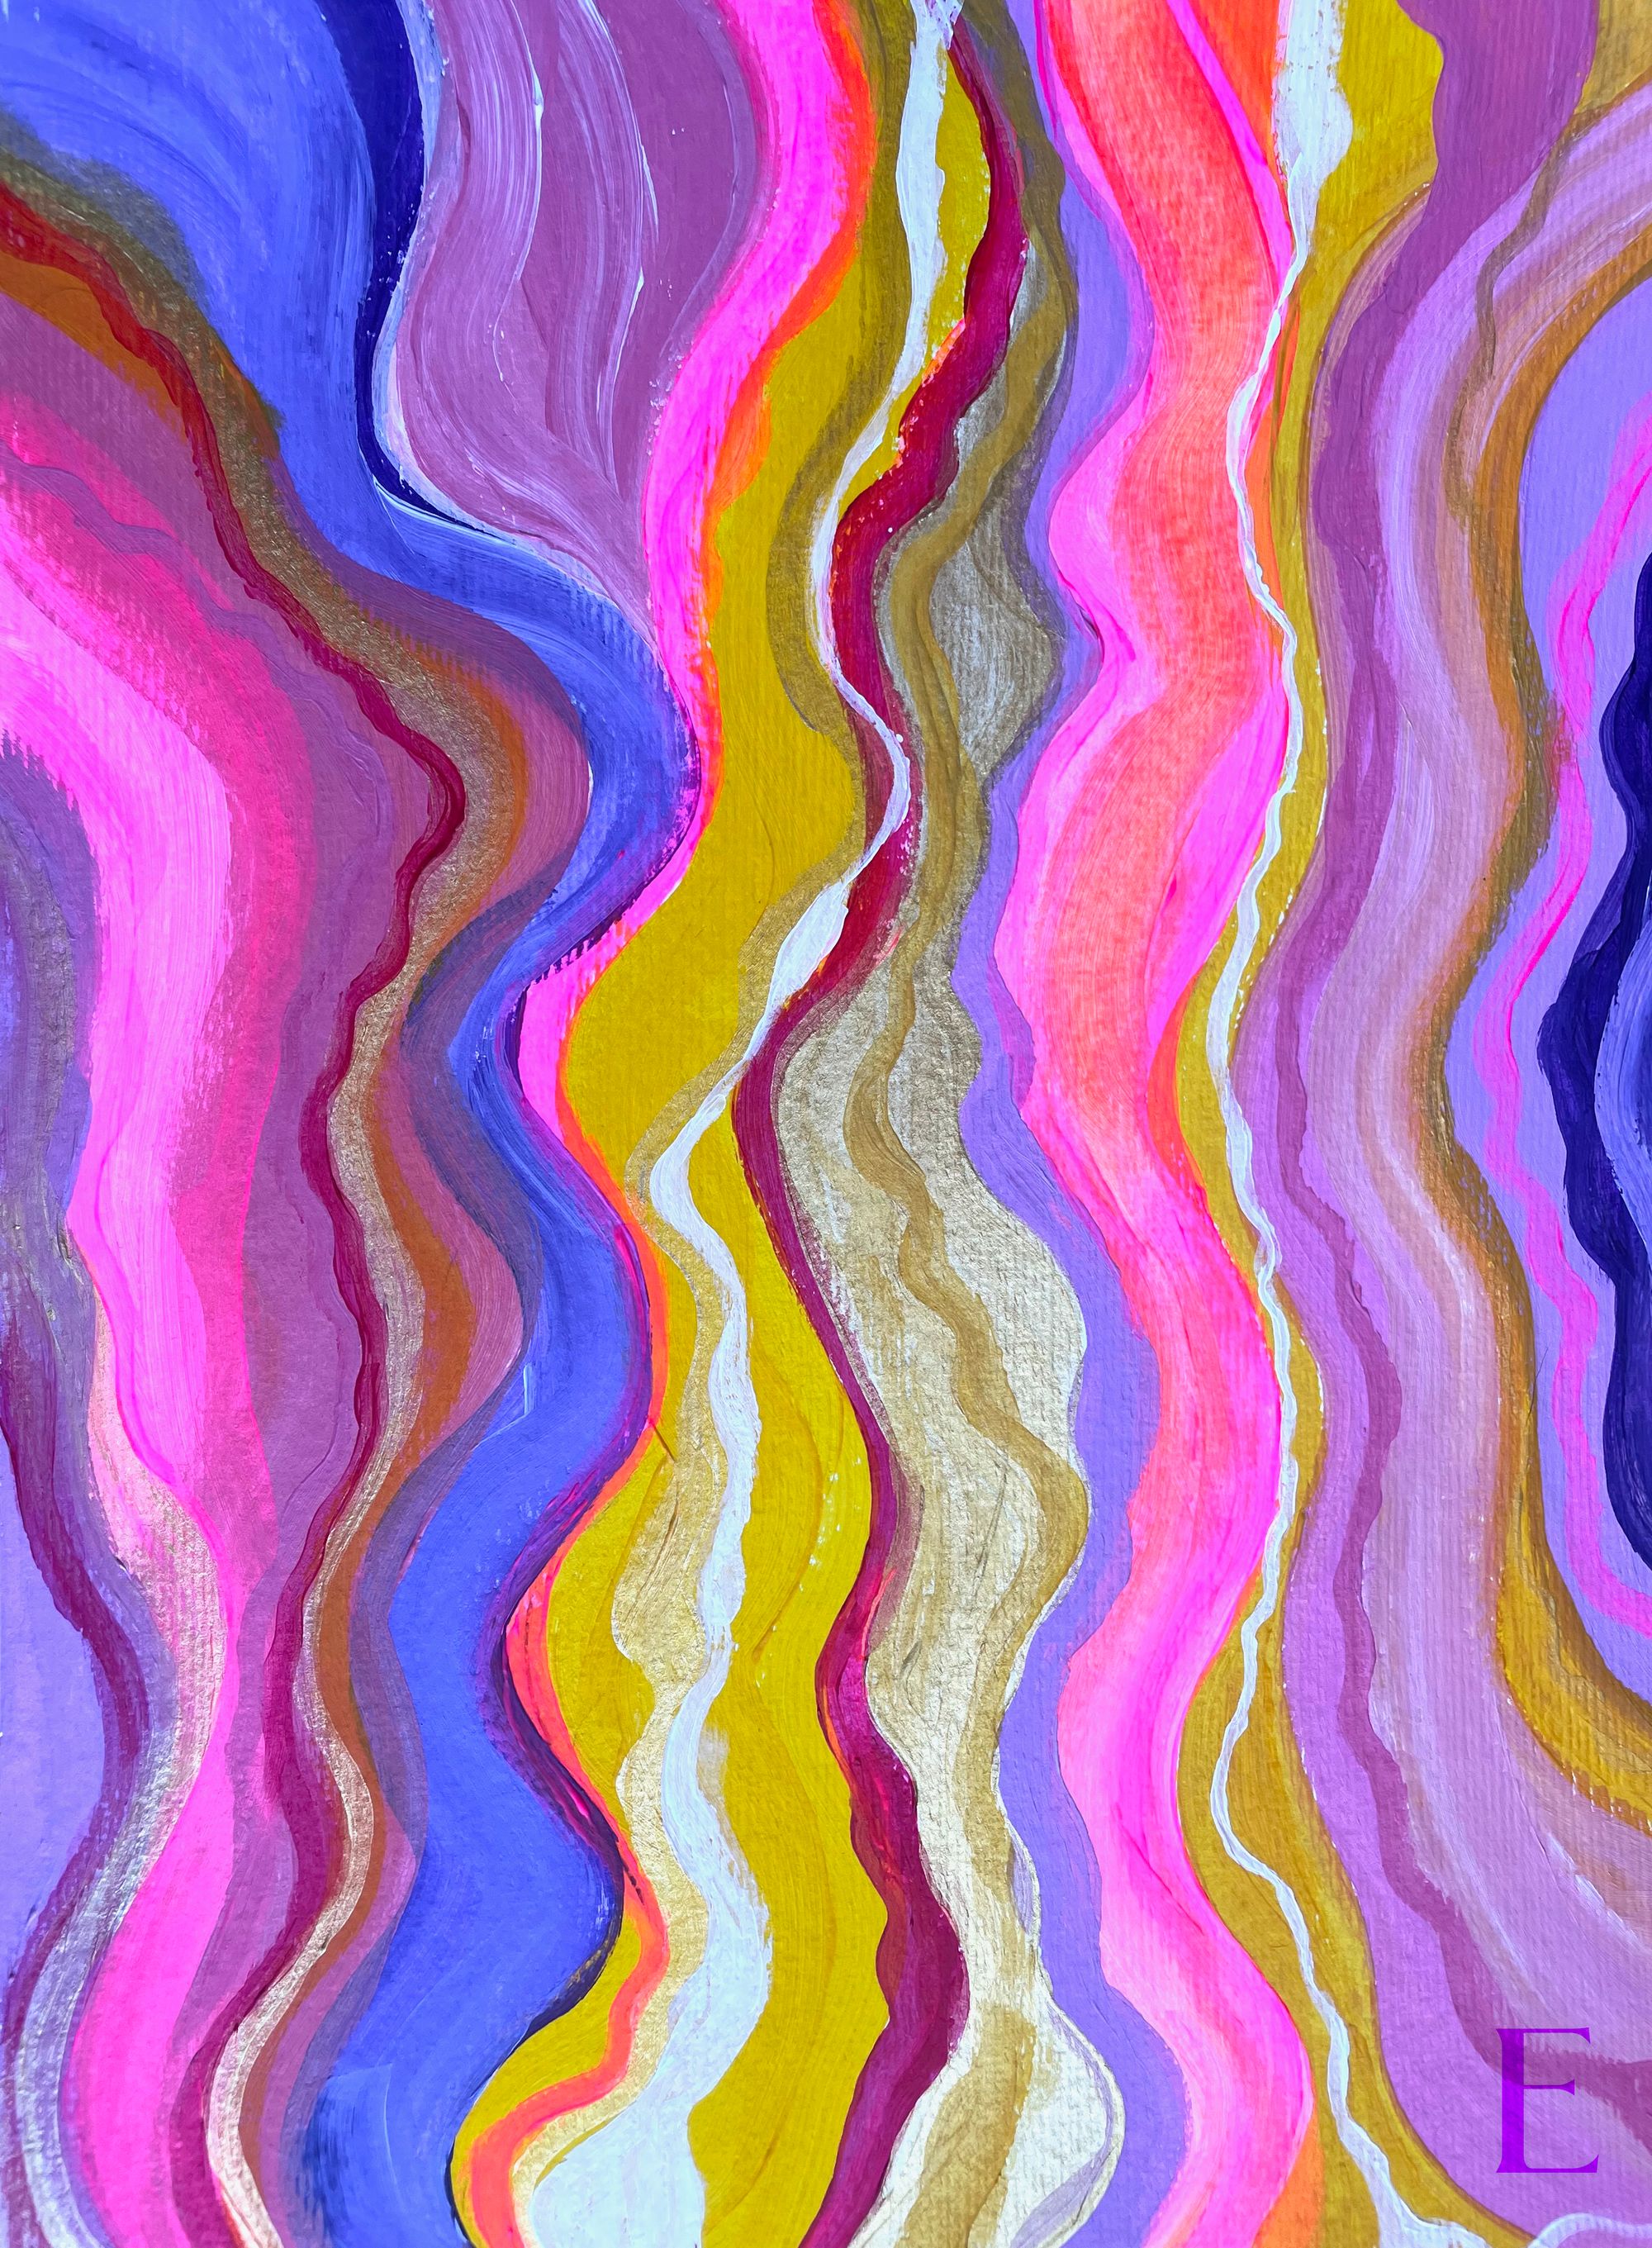 Sunday Candy #23 Collab: Currents of Connection